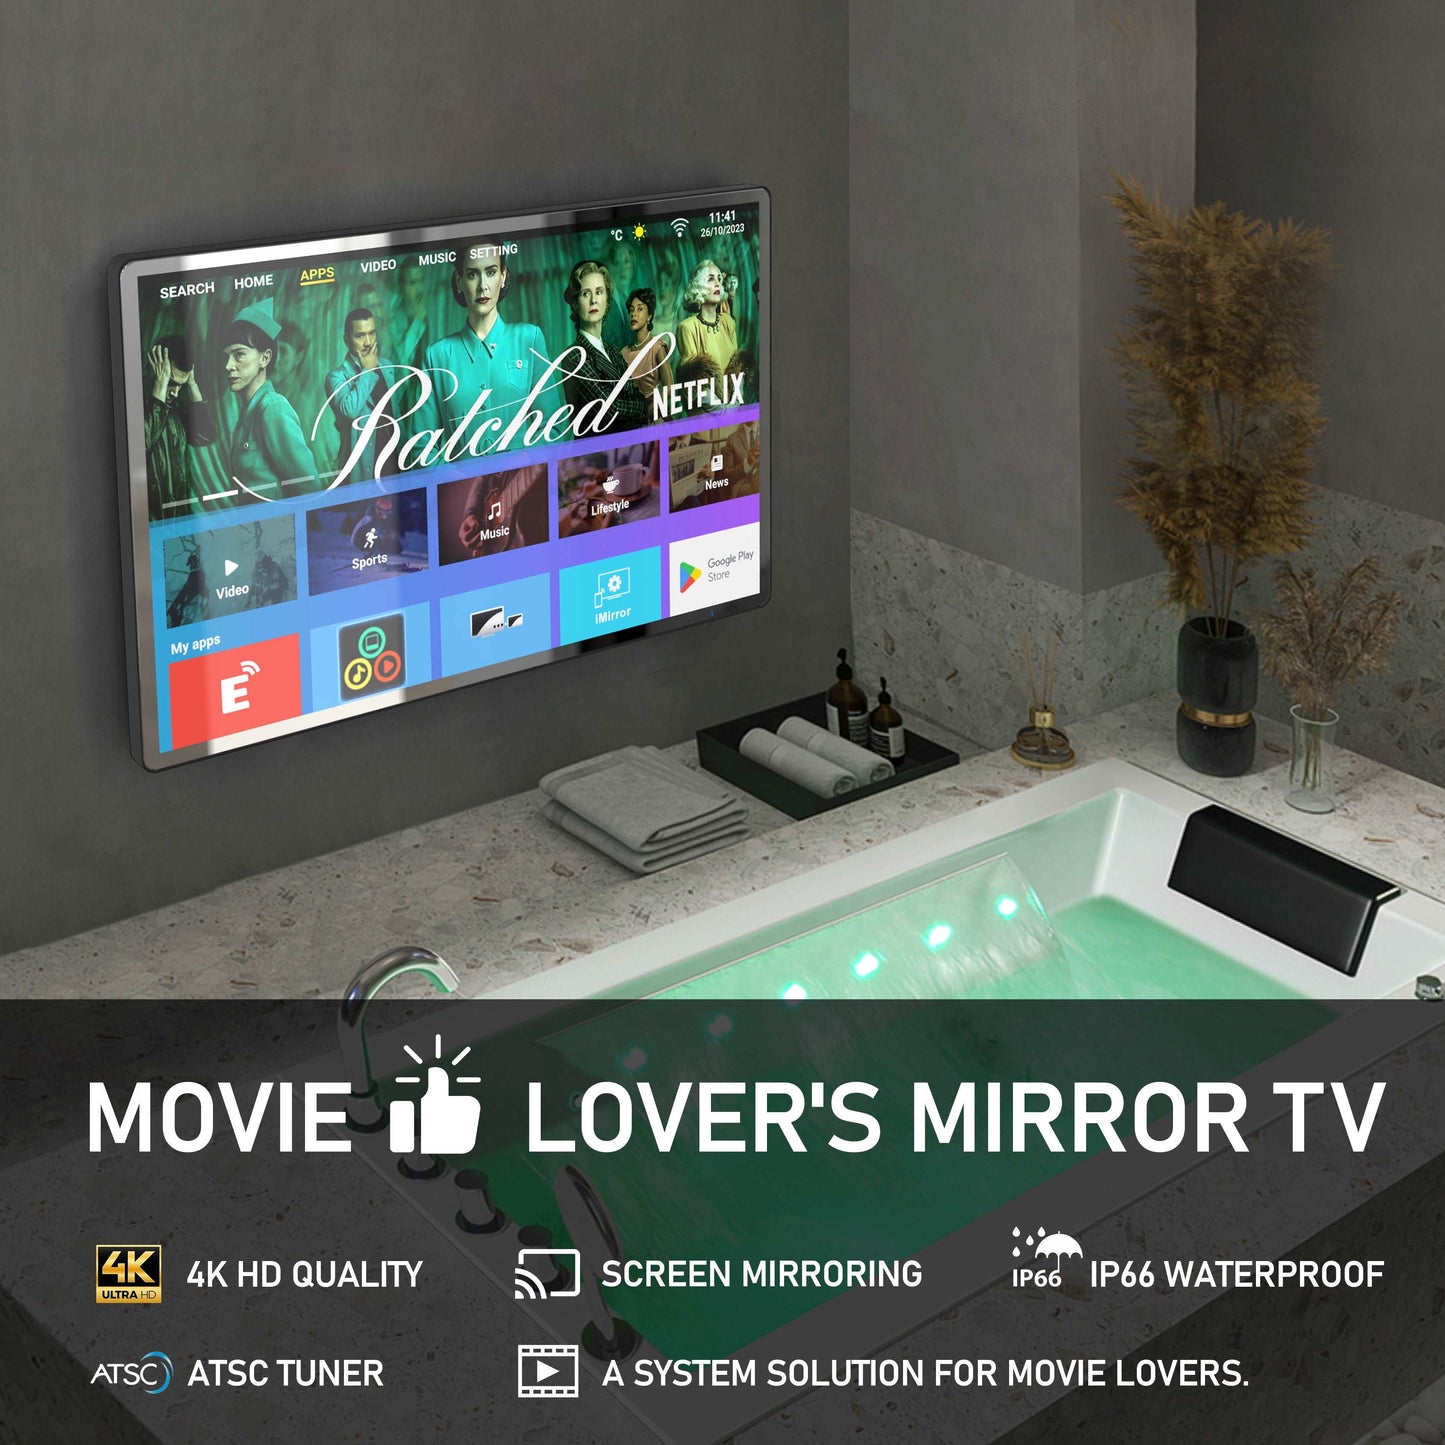 (Sale)4K Ultra HD 32-inch High-end Bathroom Mirror TV IP66 Waterproof Android TV Supports Voice Remote Control Google Assistant, Built-in ATSC Tuner, HDMI (ARC), SPDIF (LEOSMDKR-32)